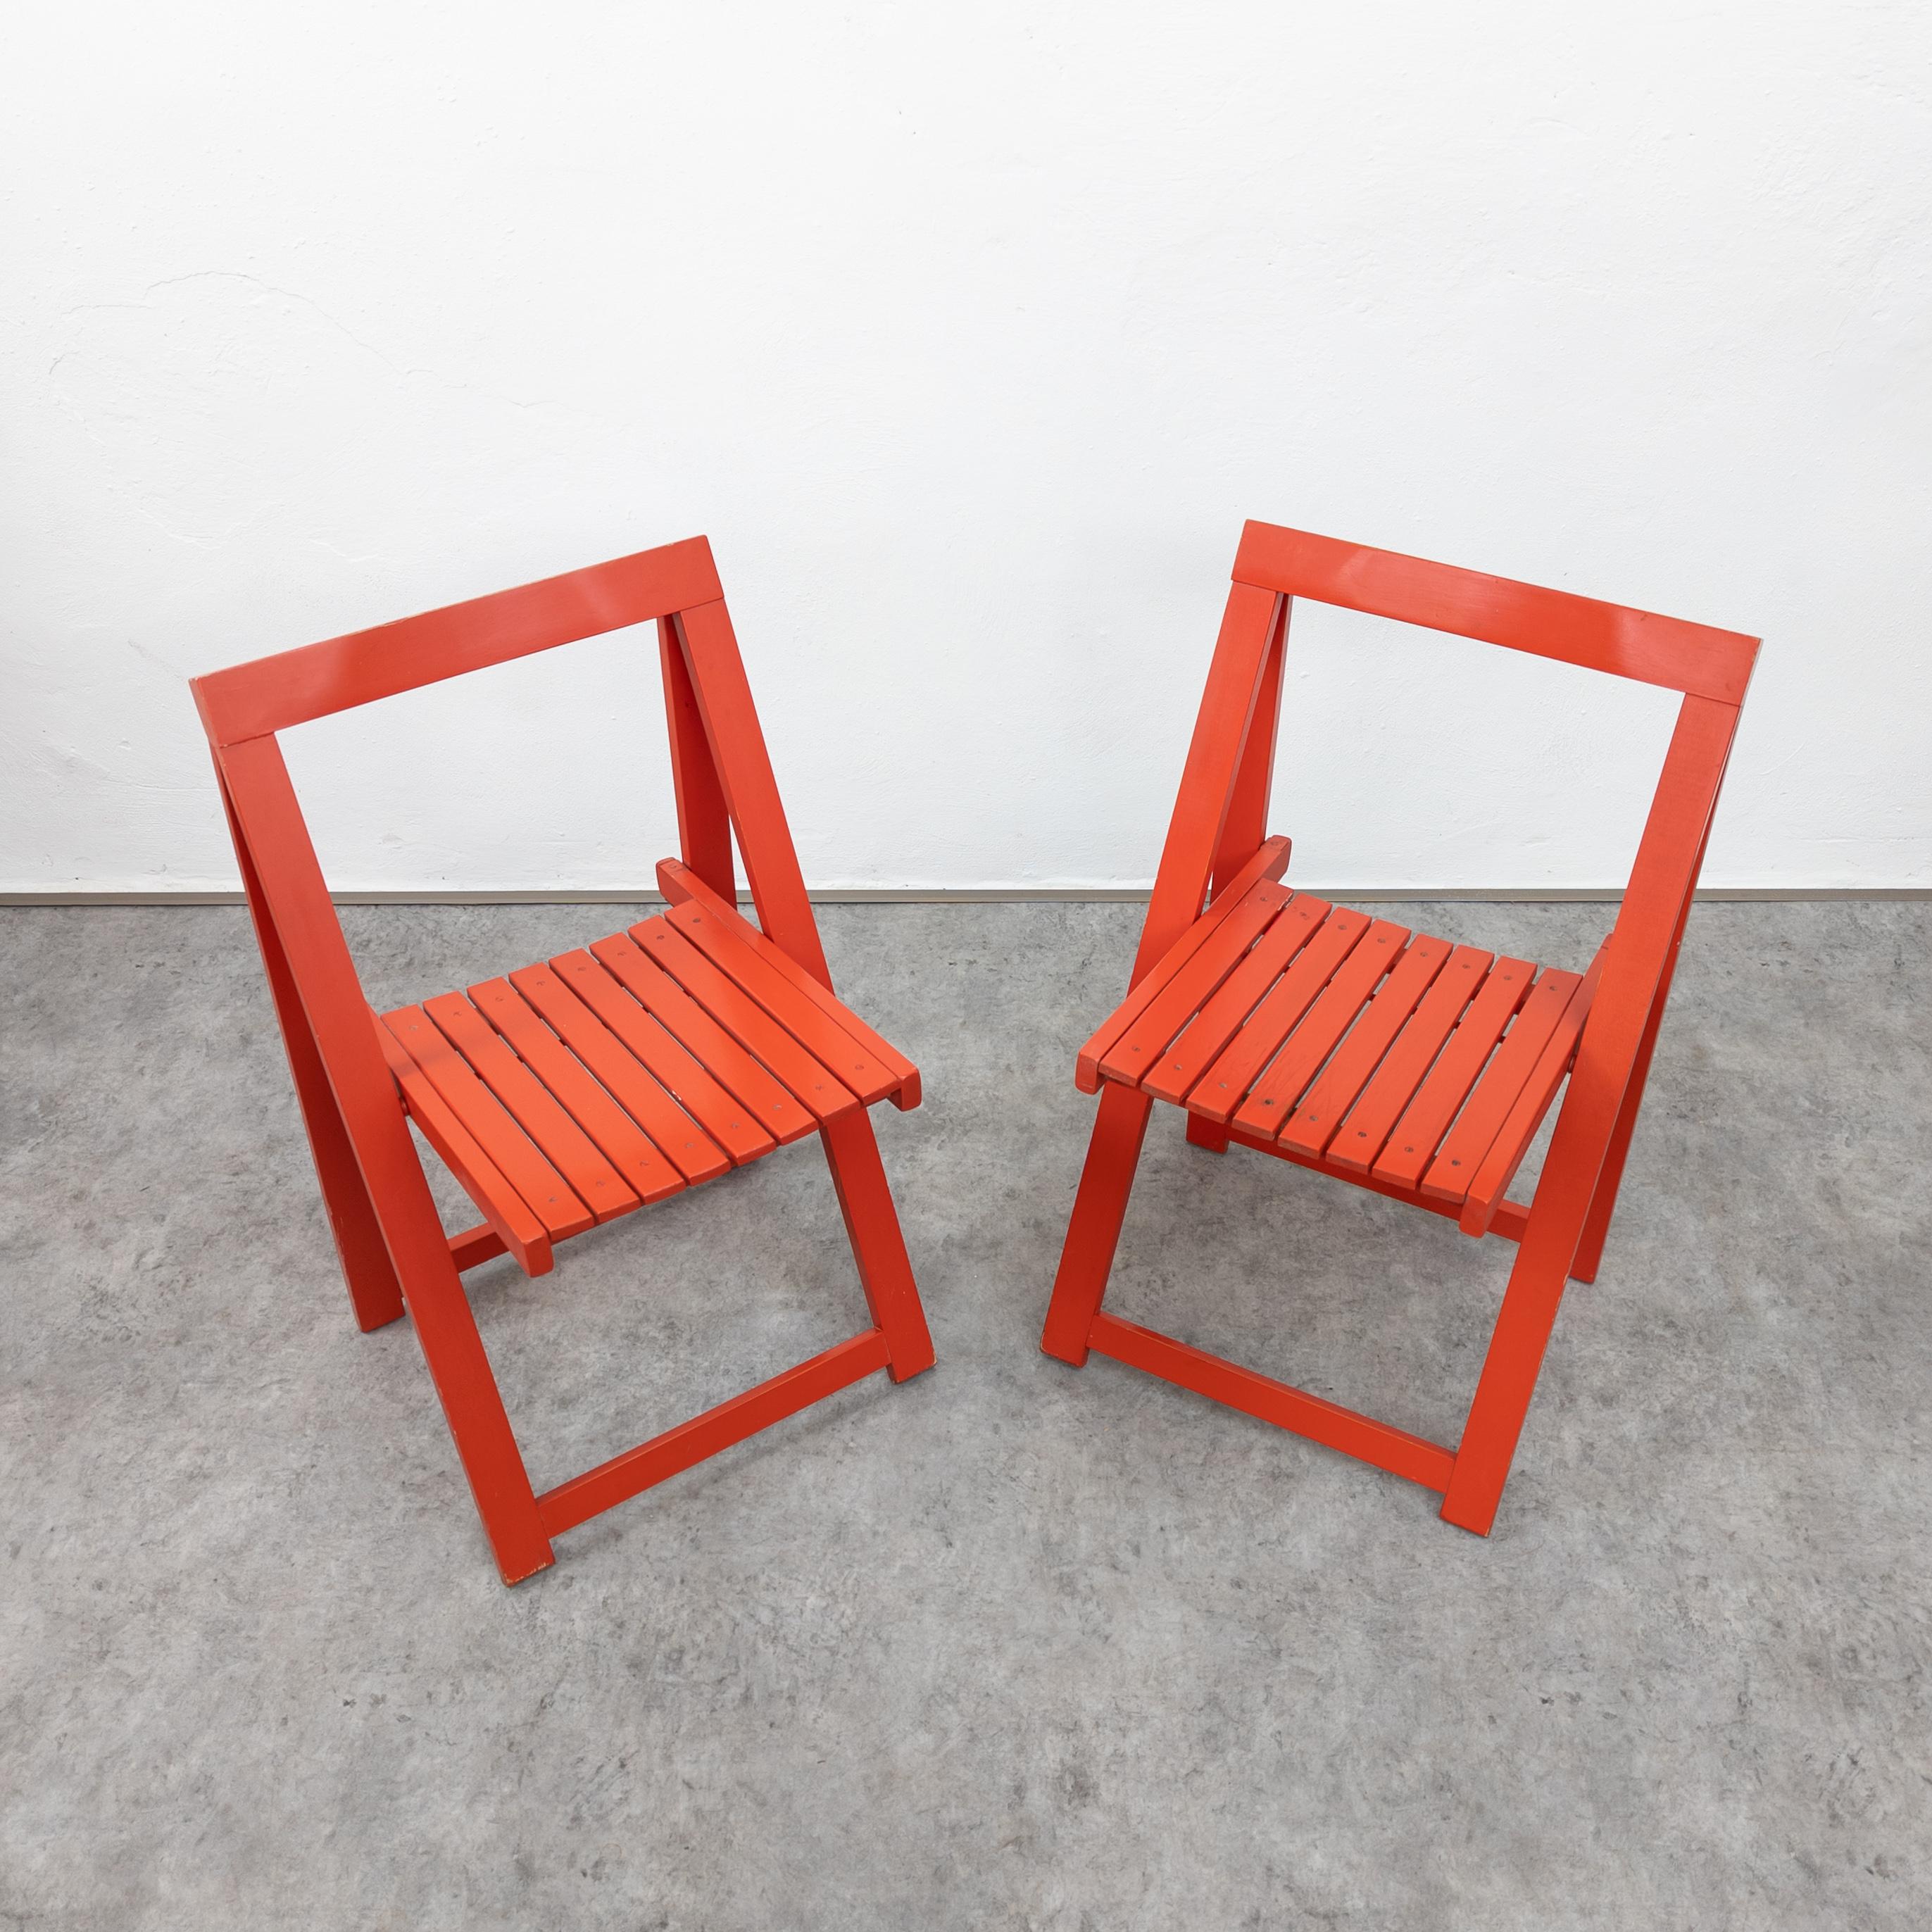 Pair of Vintage Folding Chairs by Aldo Jacober for Alberto Bazzani In Good Condition For Sale In PRAHA 5, CZ